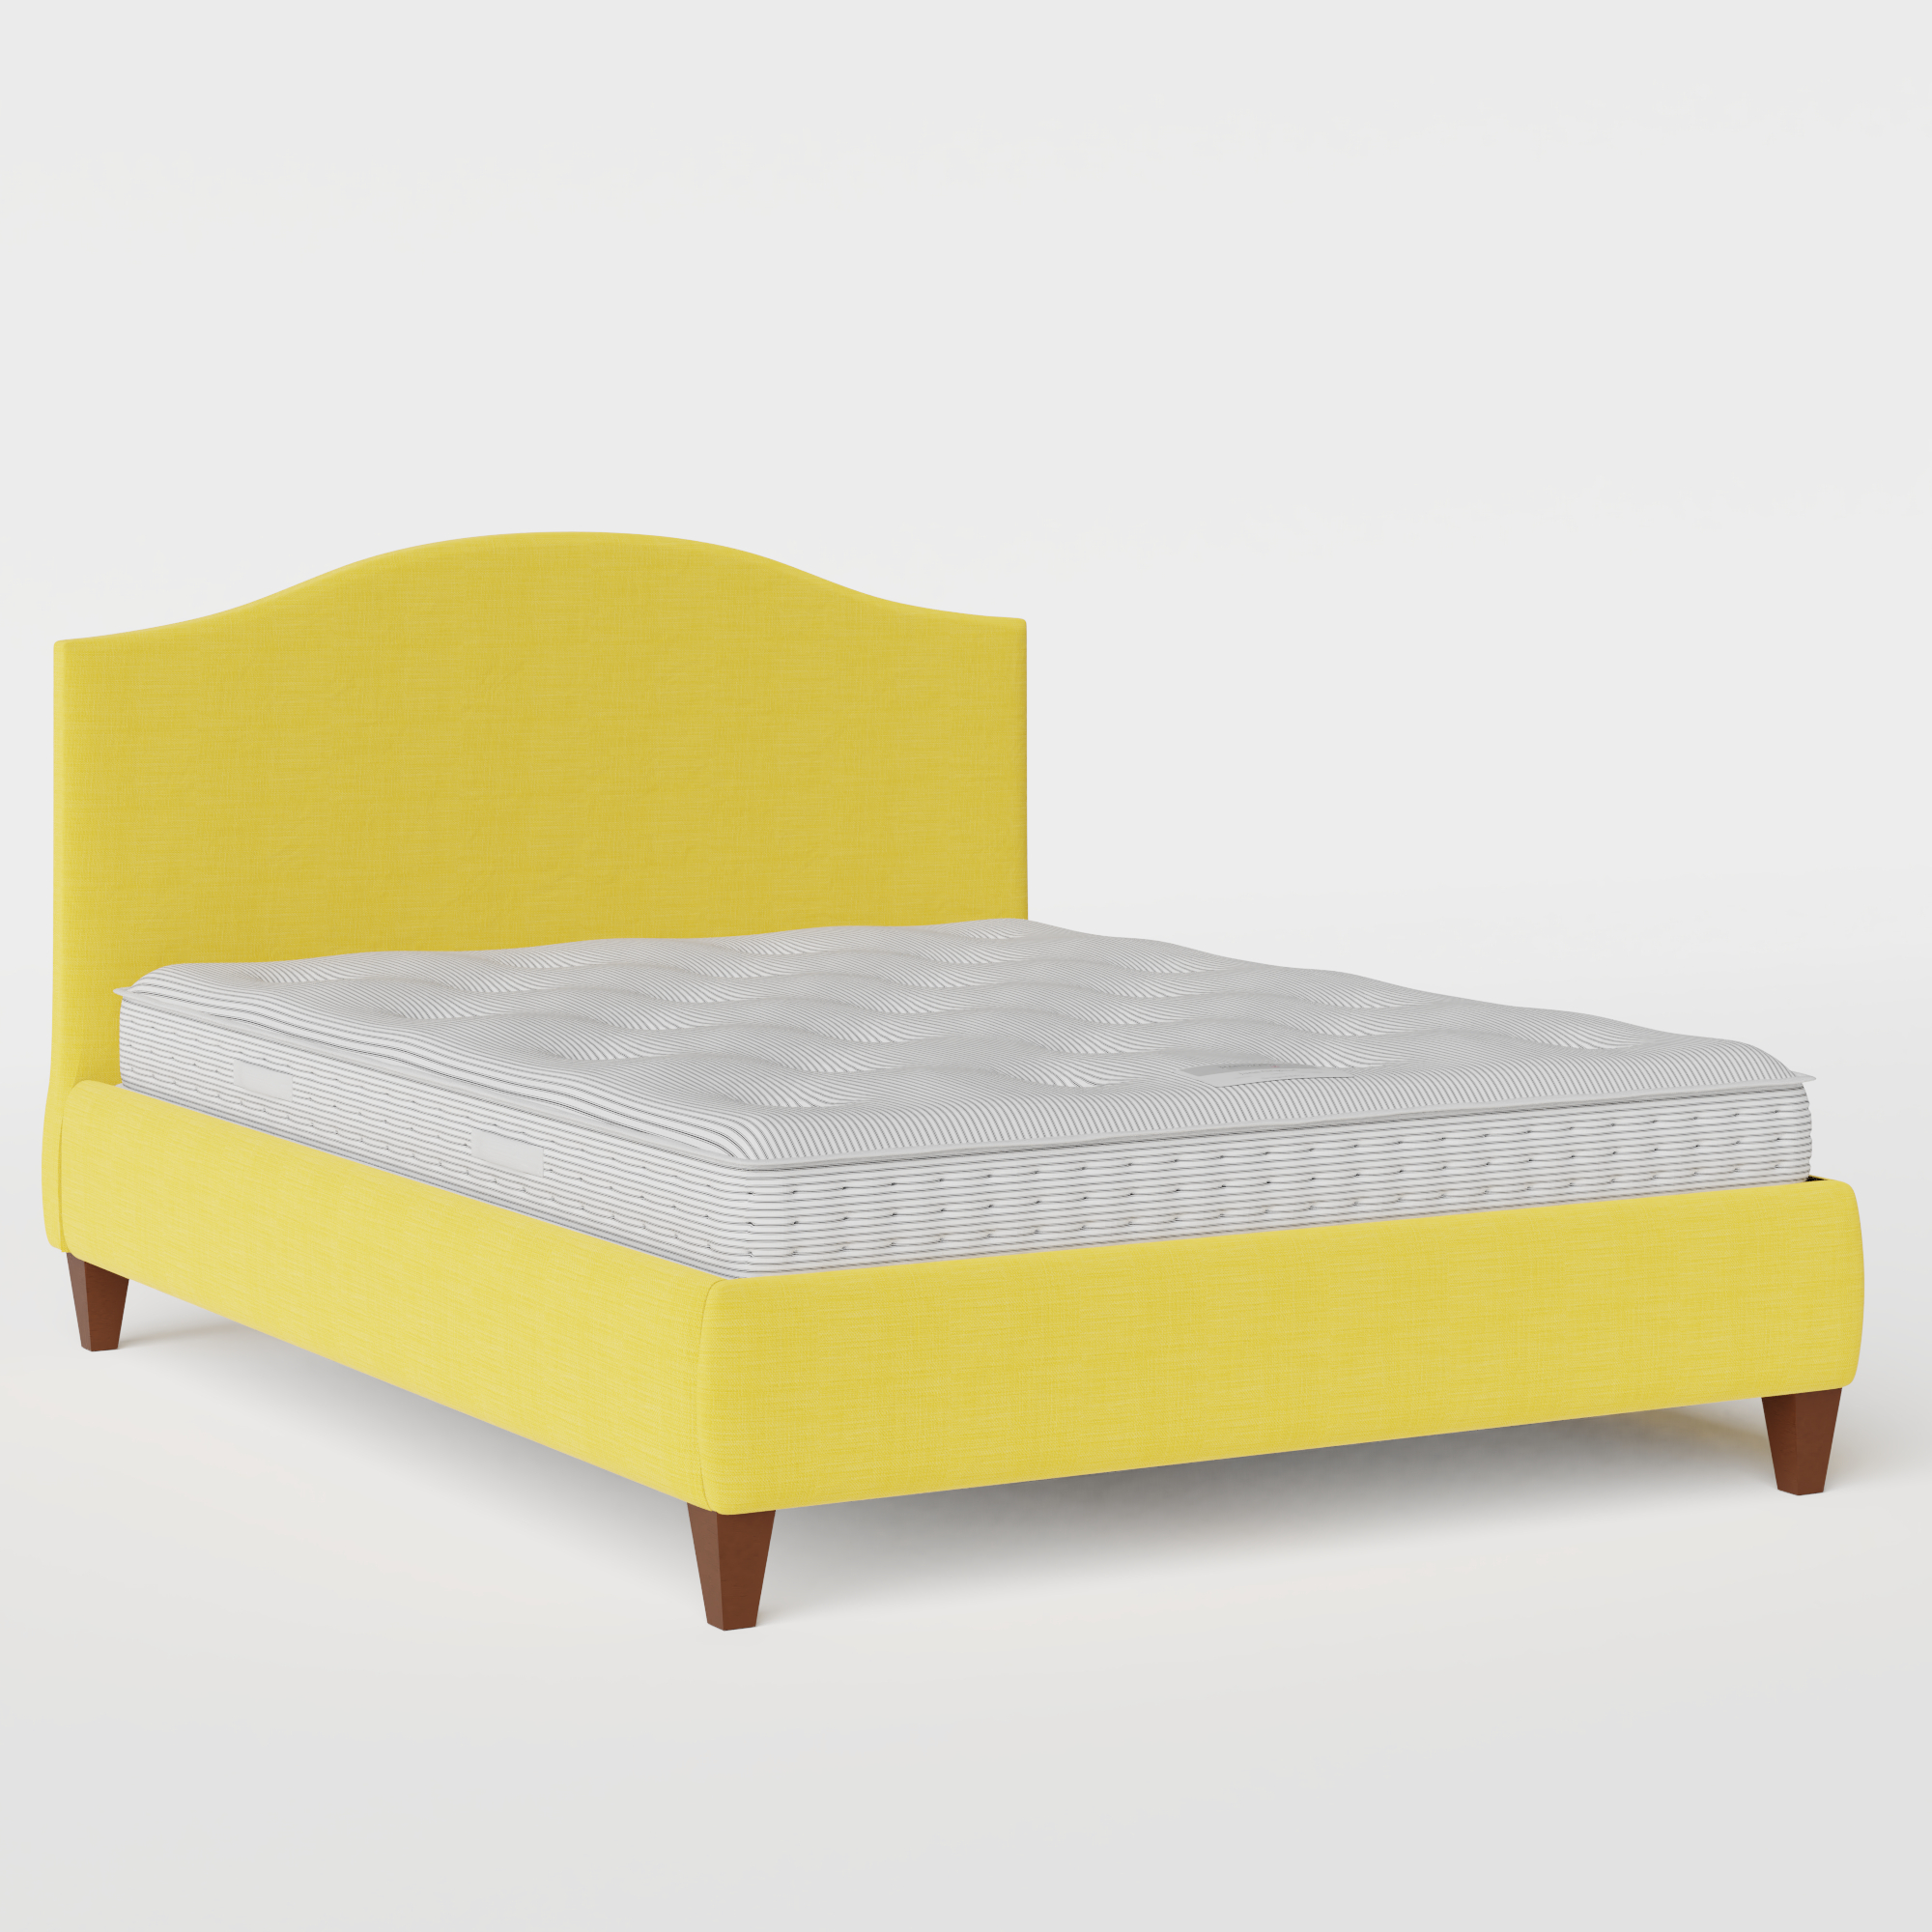 Daniella upholstered bed in sunflower fabric